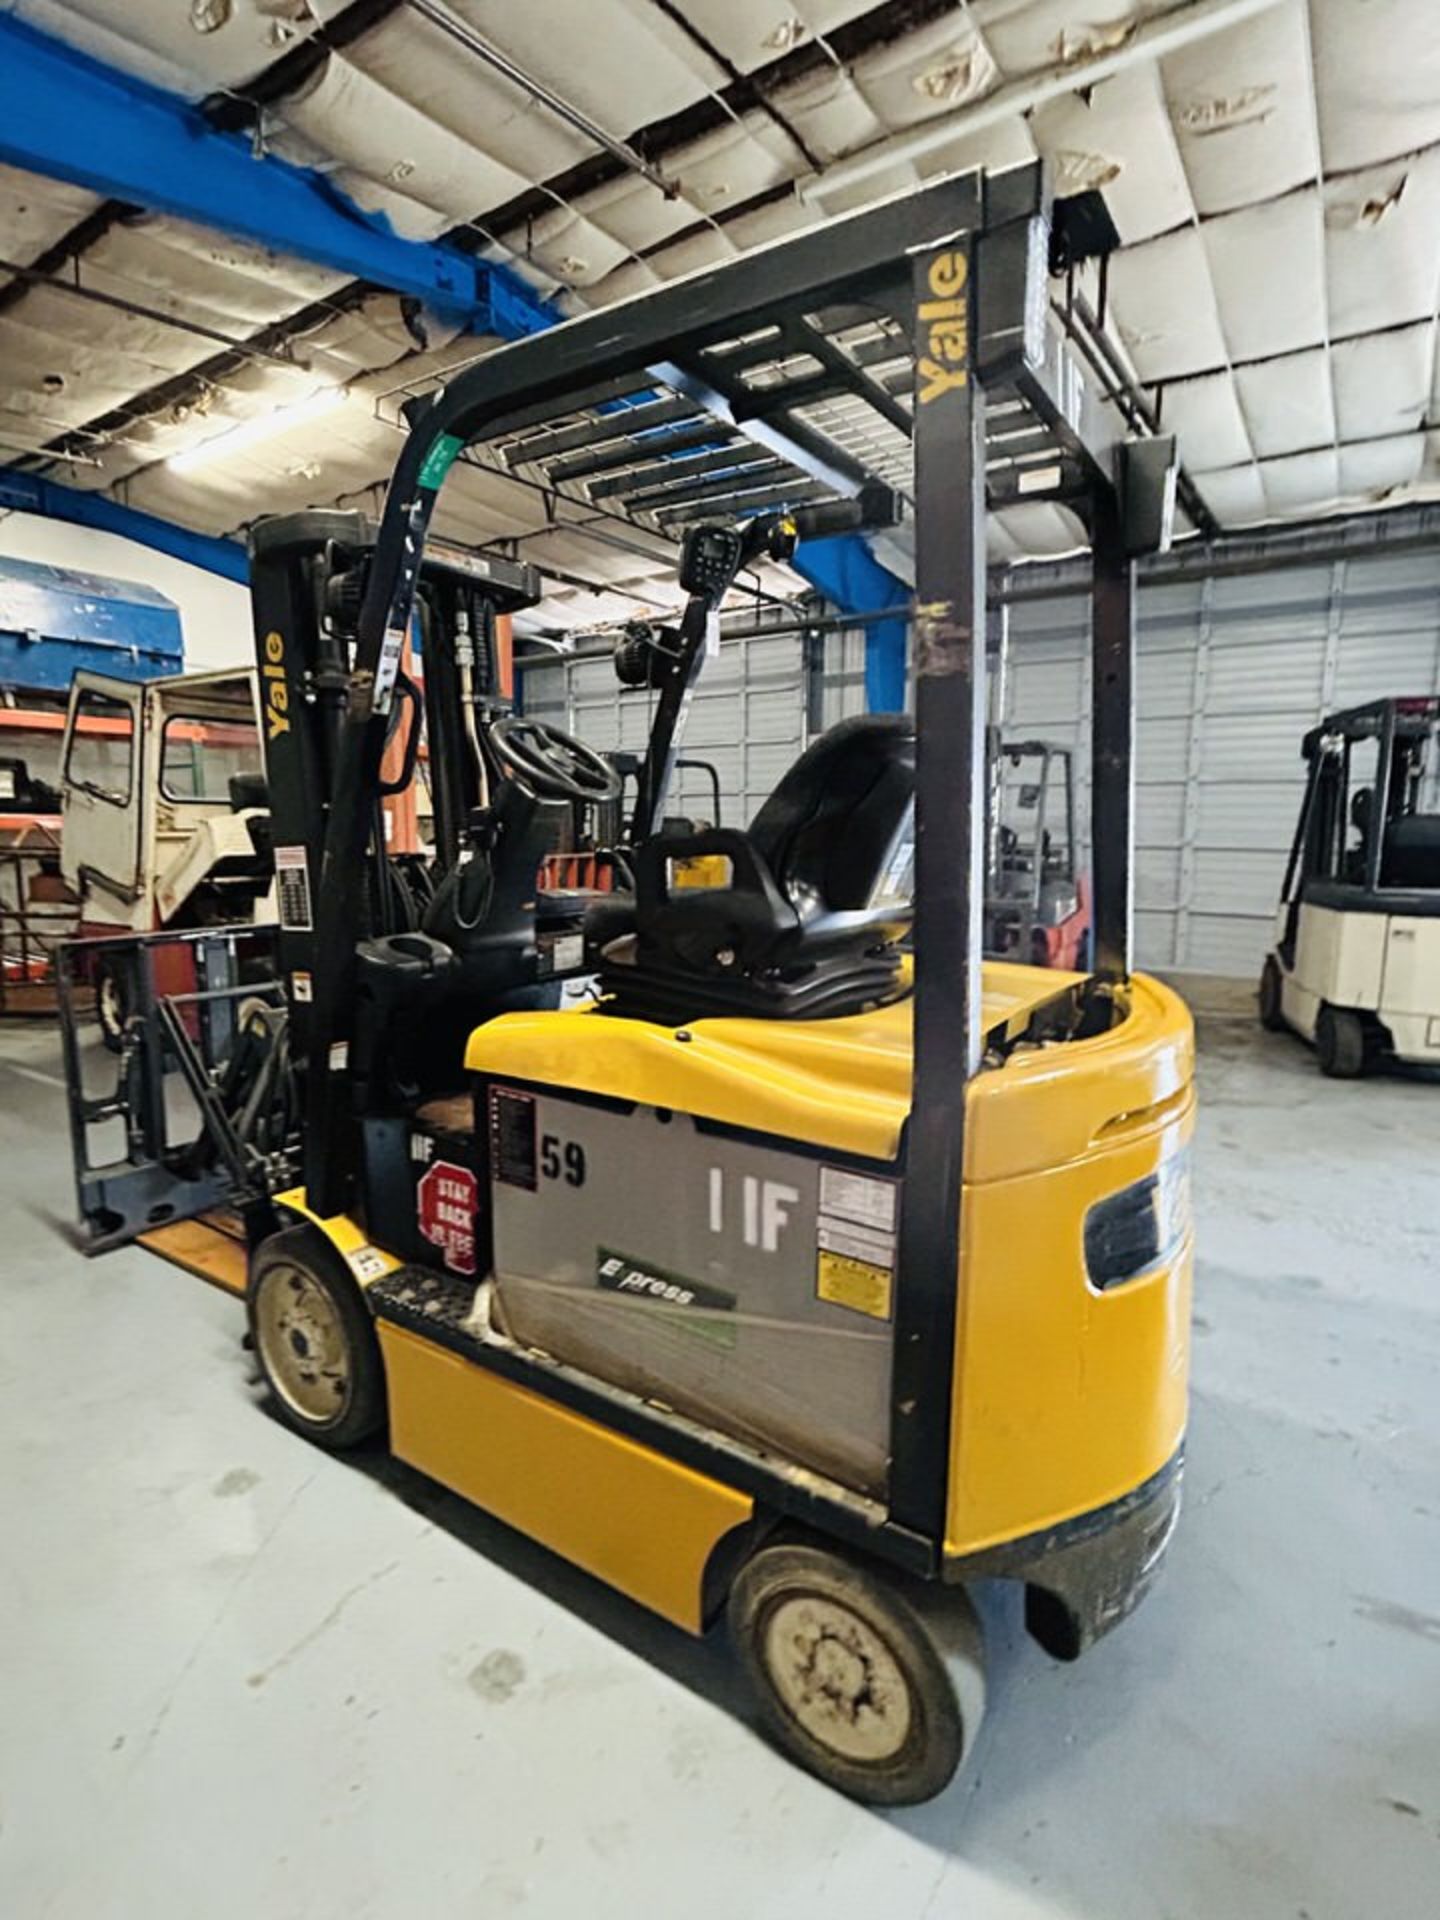 2013 Yale Electric 5,000 lbs Forklift, 3 Stage Mast, Sideshift, 42" Forks, Pull/Push Attchmnt - Image 3 of 5